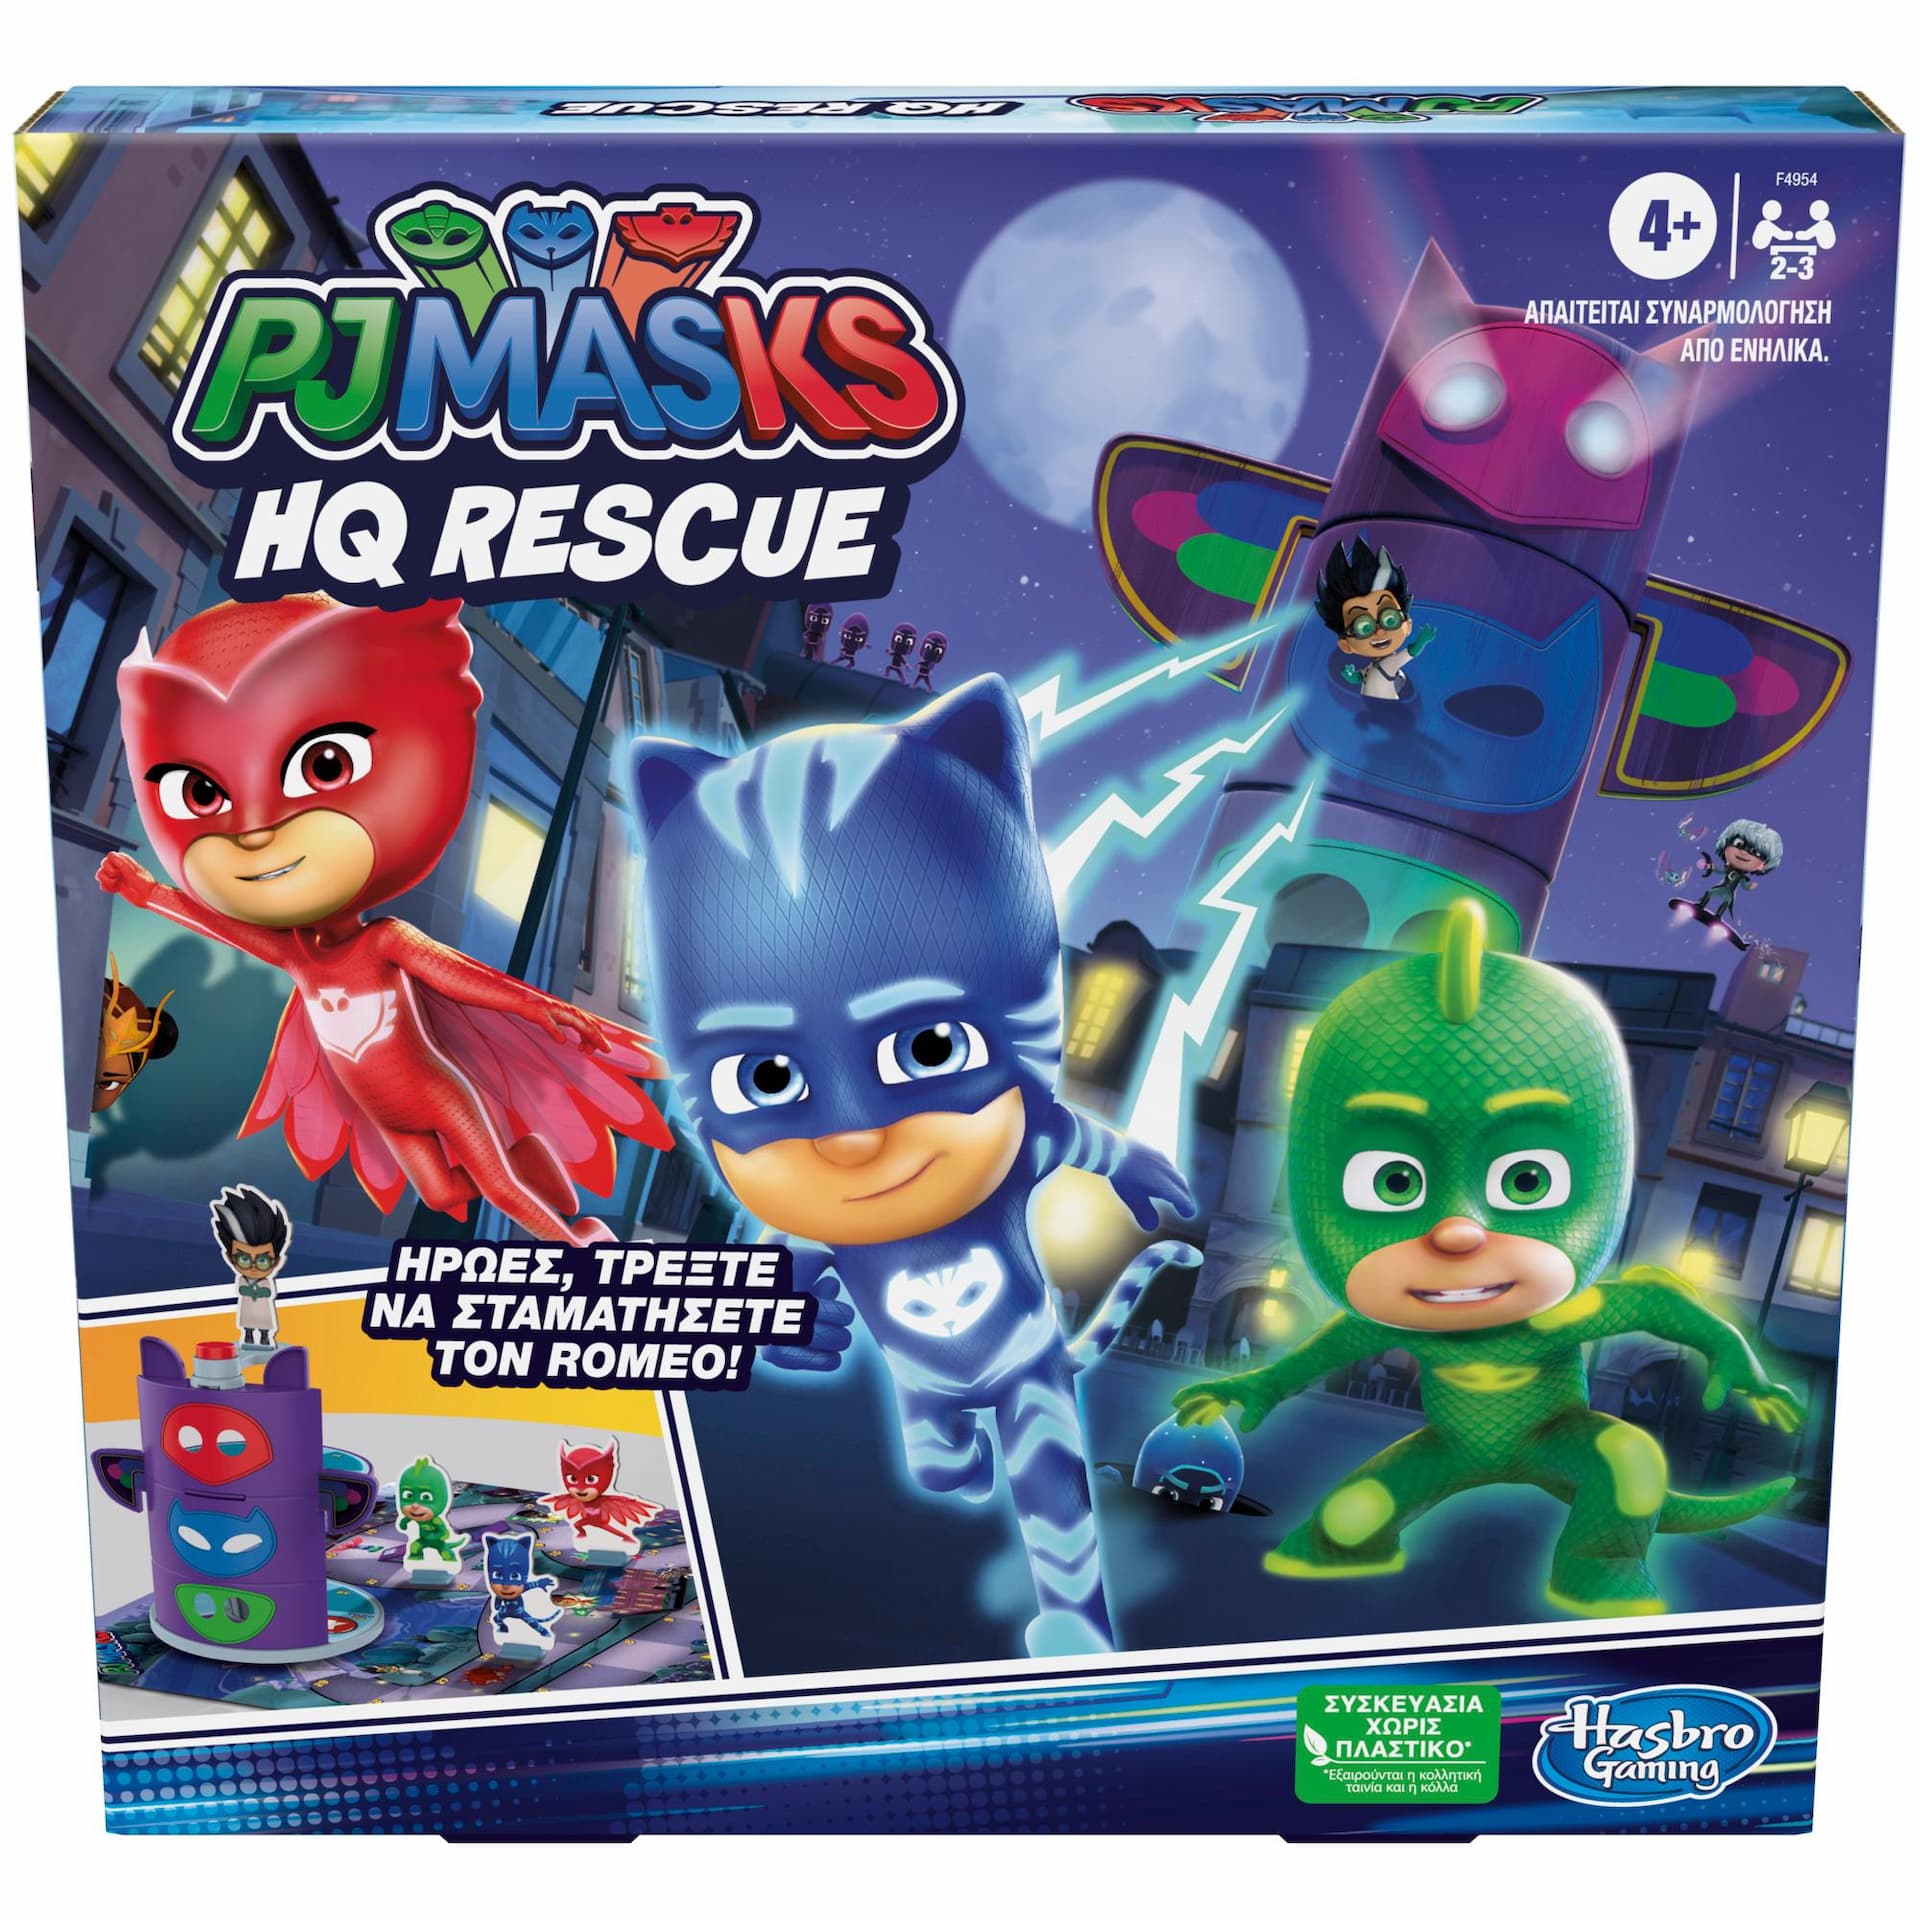 PJ Masks HQ Rescue Board Game for Kids Ages 4+ Fun Preschool Game, Includes 3D Plastic Tower